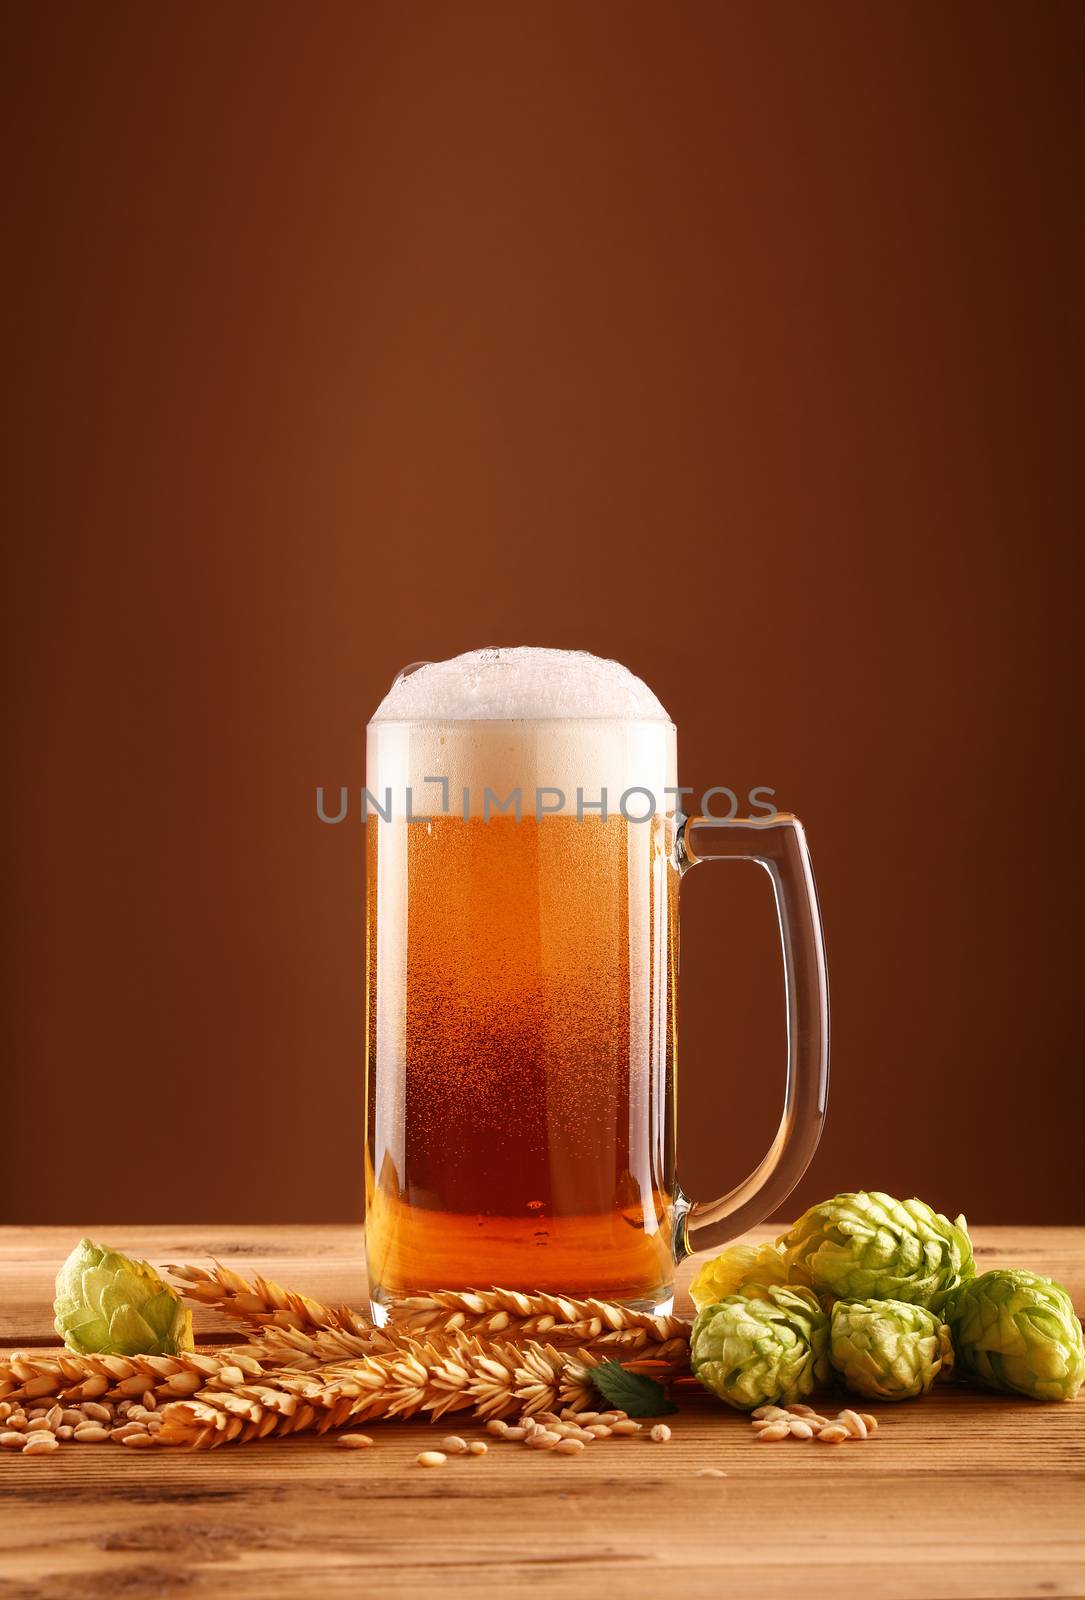 Close up one glass mug of beer with froth and bubbles, green hops and barley grain and spikes on wooden table over dark brown background with copy space, low angle side view